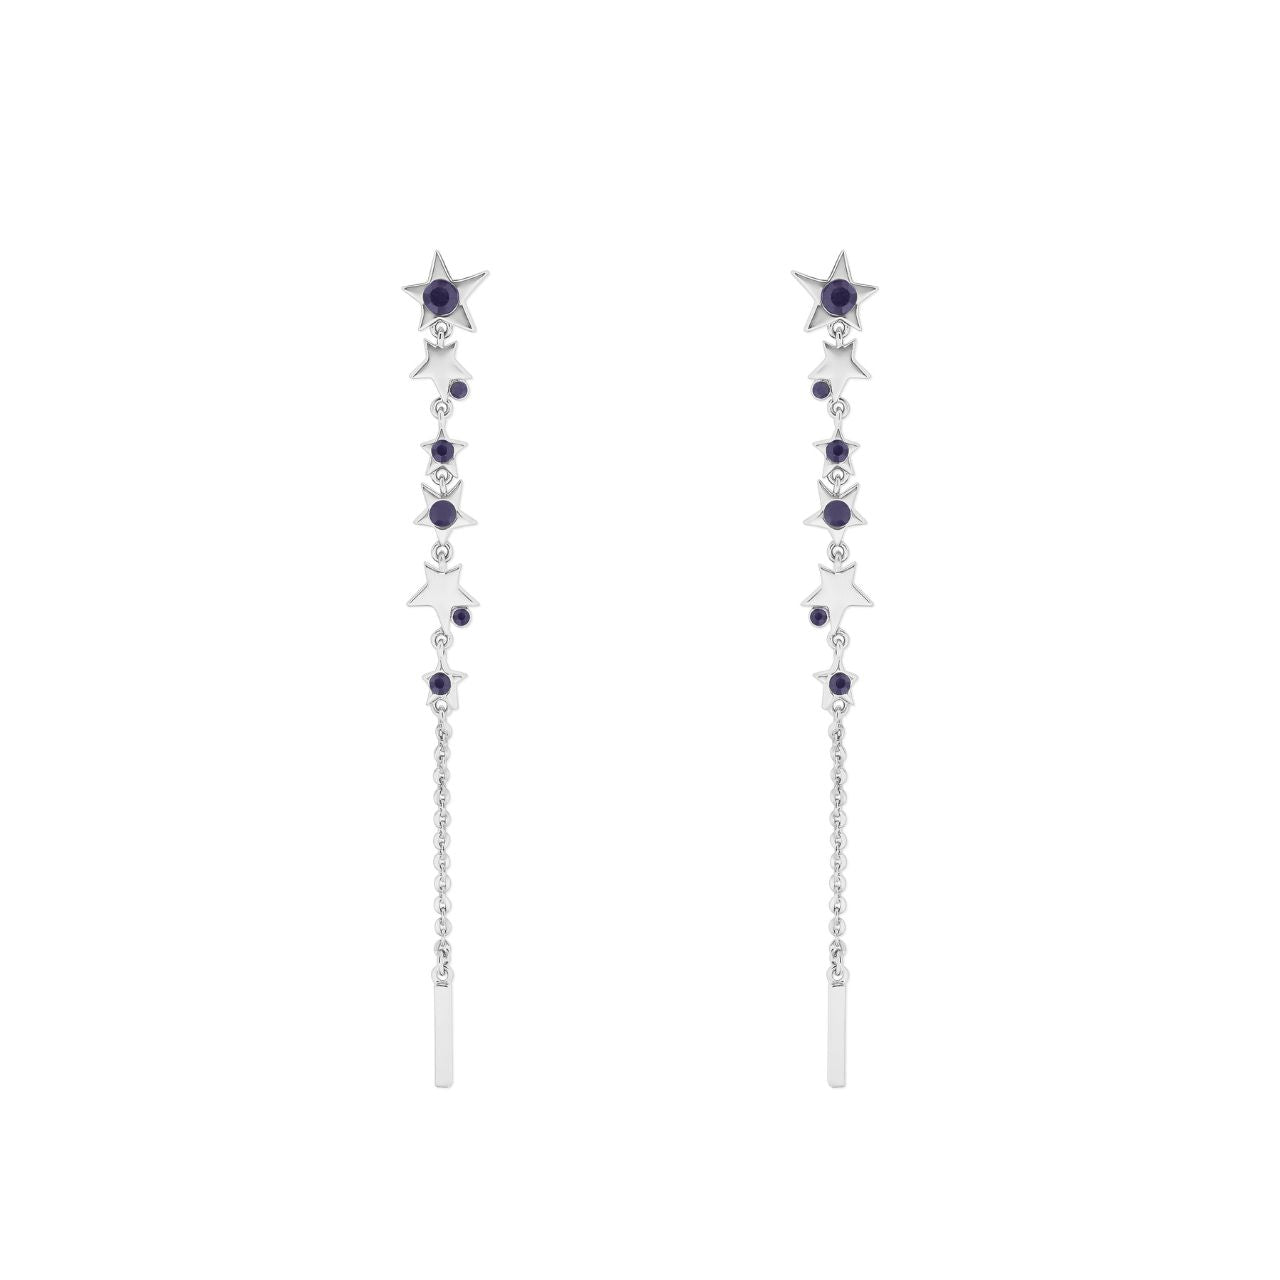 Crafted by Tipperary, these dazzling silver Shooting Star Earrings add a touch of sparkle to any outfit. Made with high-quality materials, these earrings are designed to last while making a statement. Perfect for both casual and formal occasions, they are a must-have for any jewellery collection.